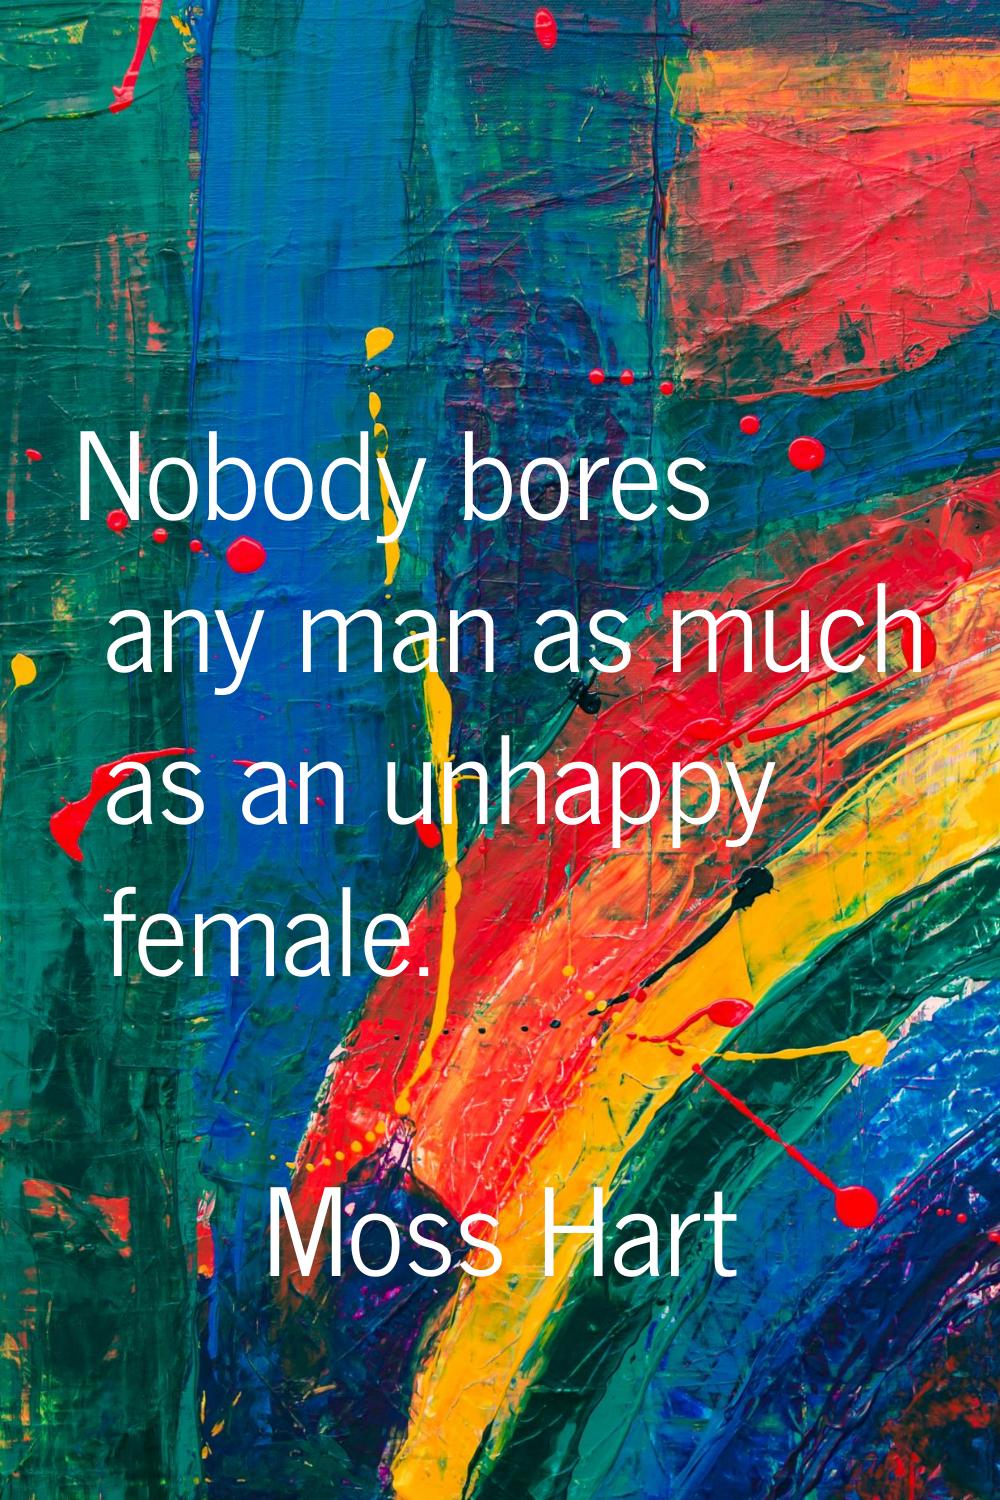 Nobody bores any man as much as an unhappy female.